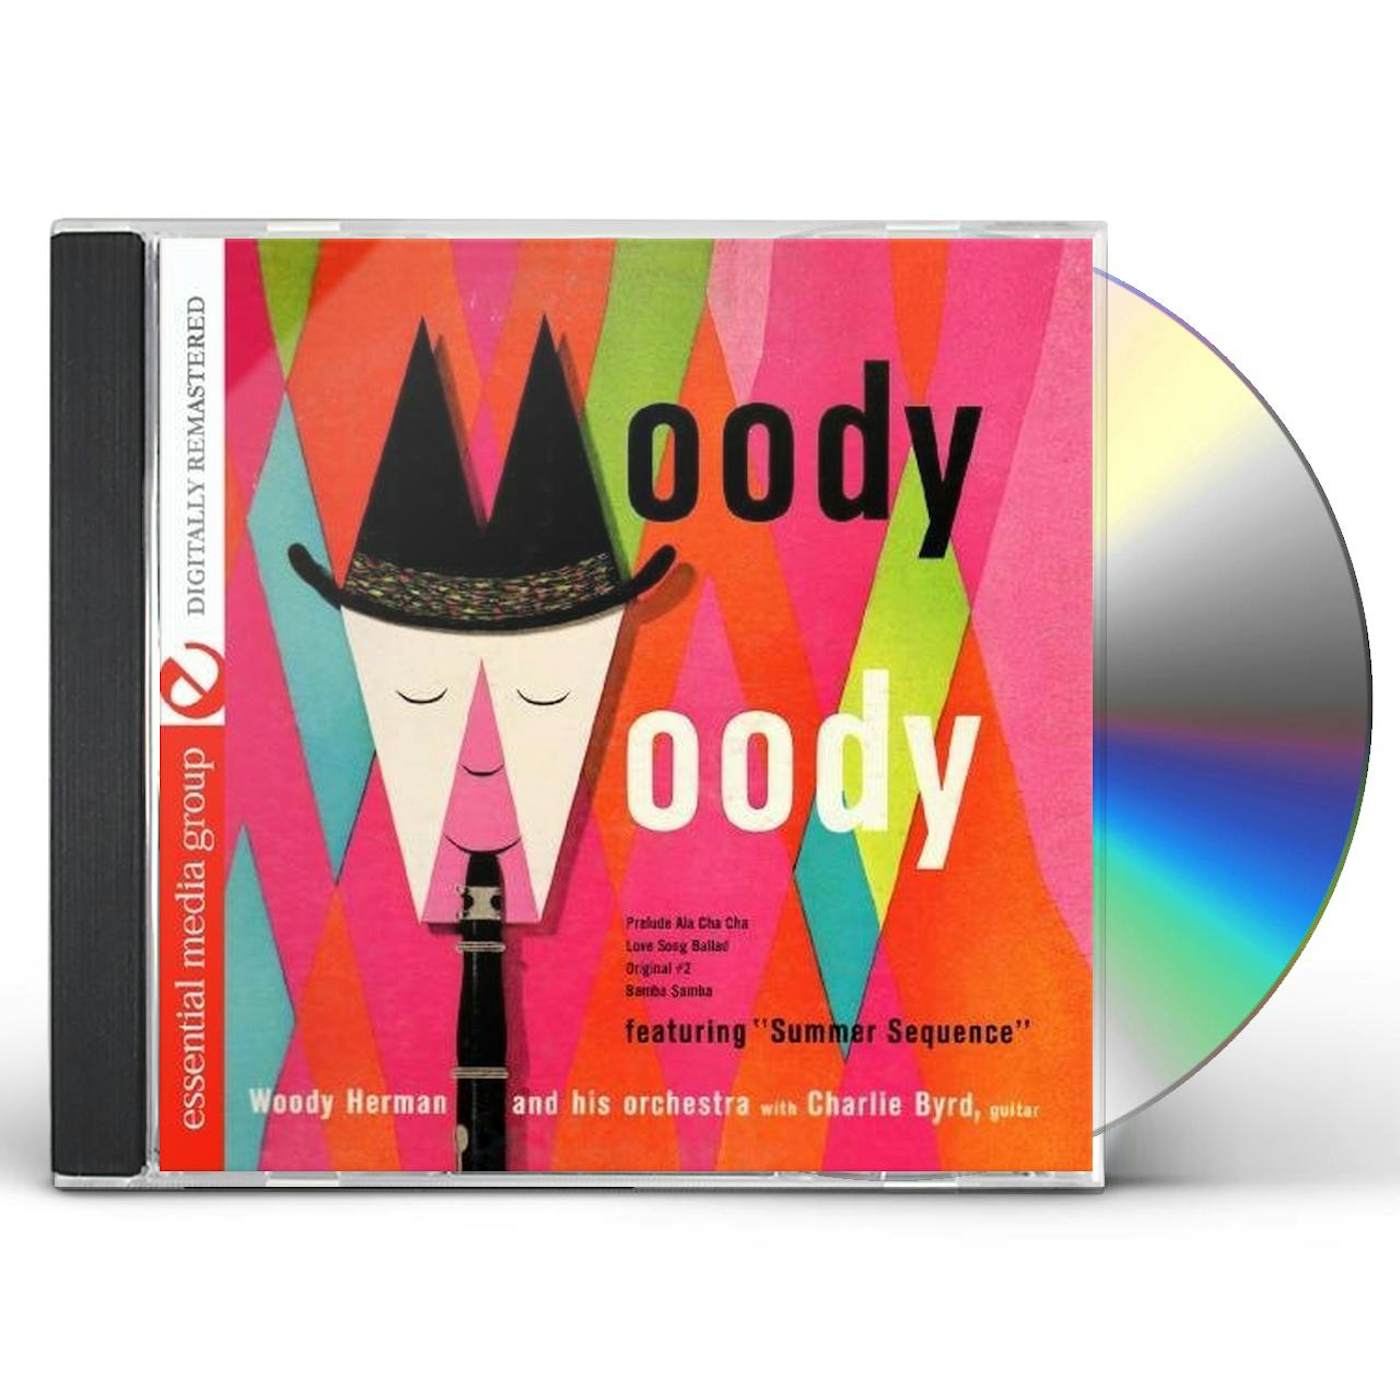 Woody Herman MOODY WOODY FEATURING SUMMER SEQUENCE CD